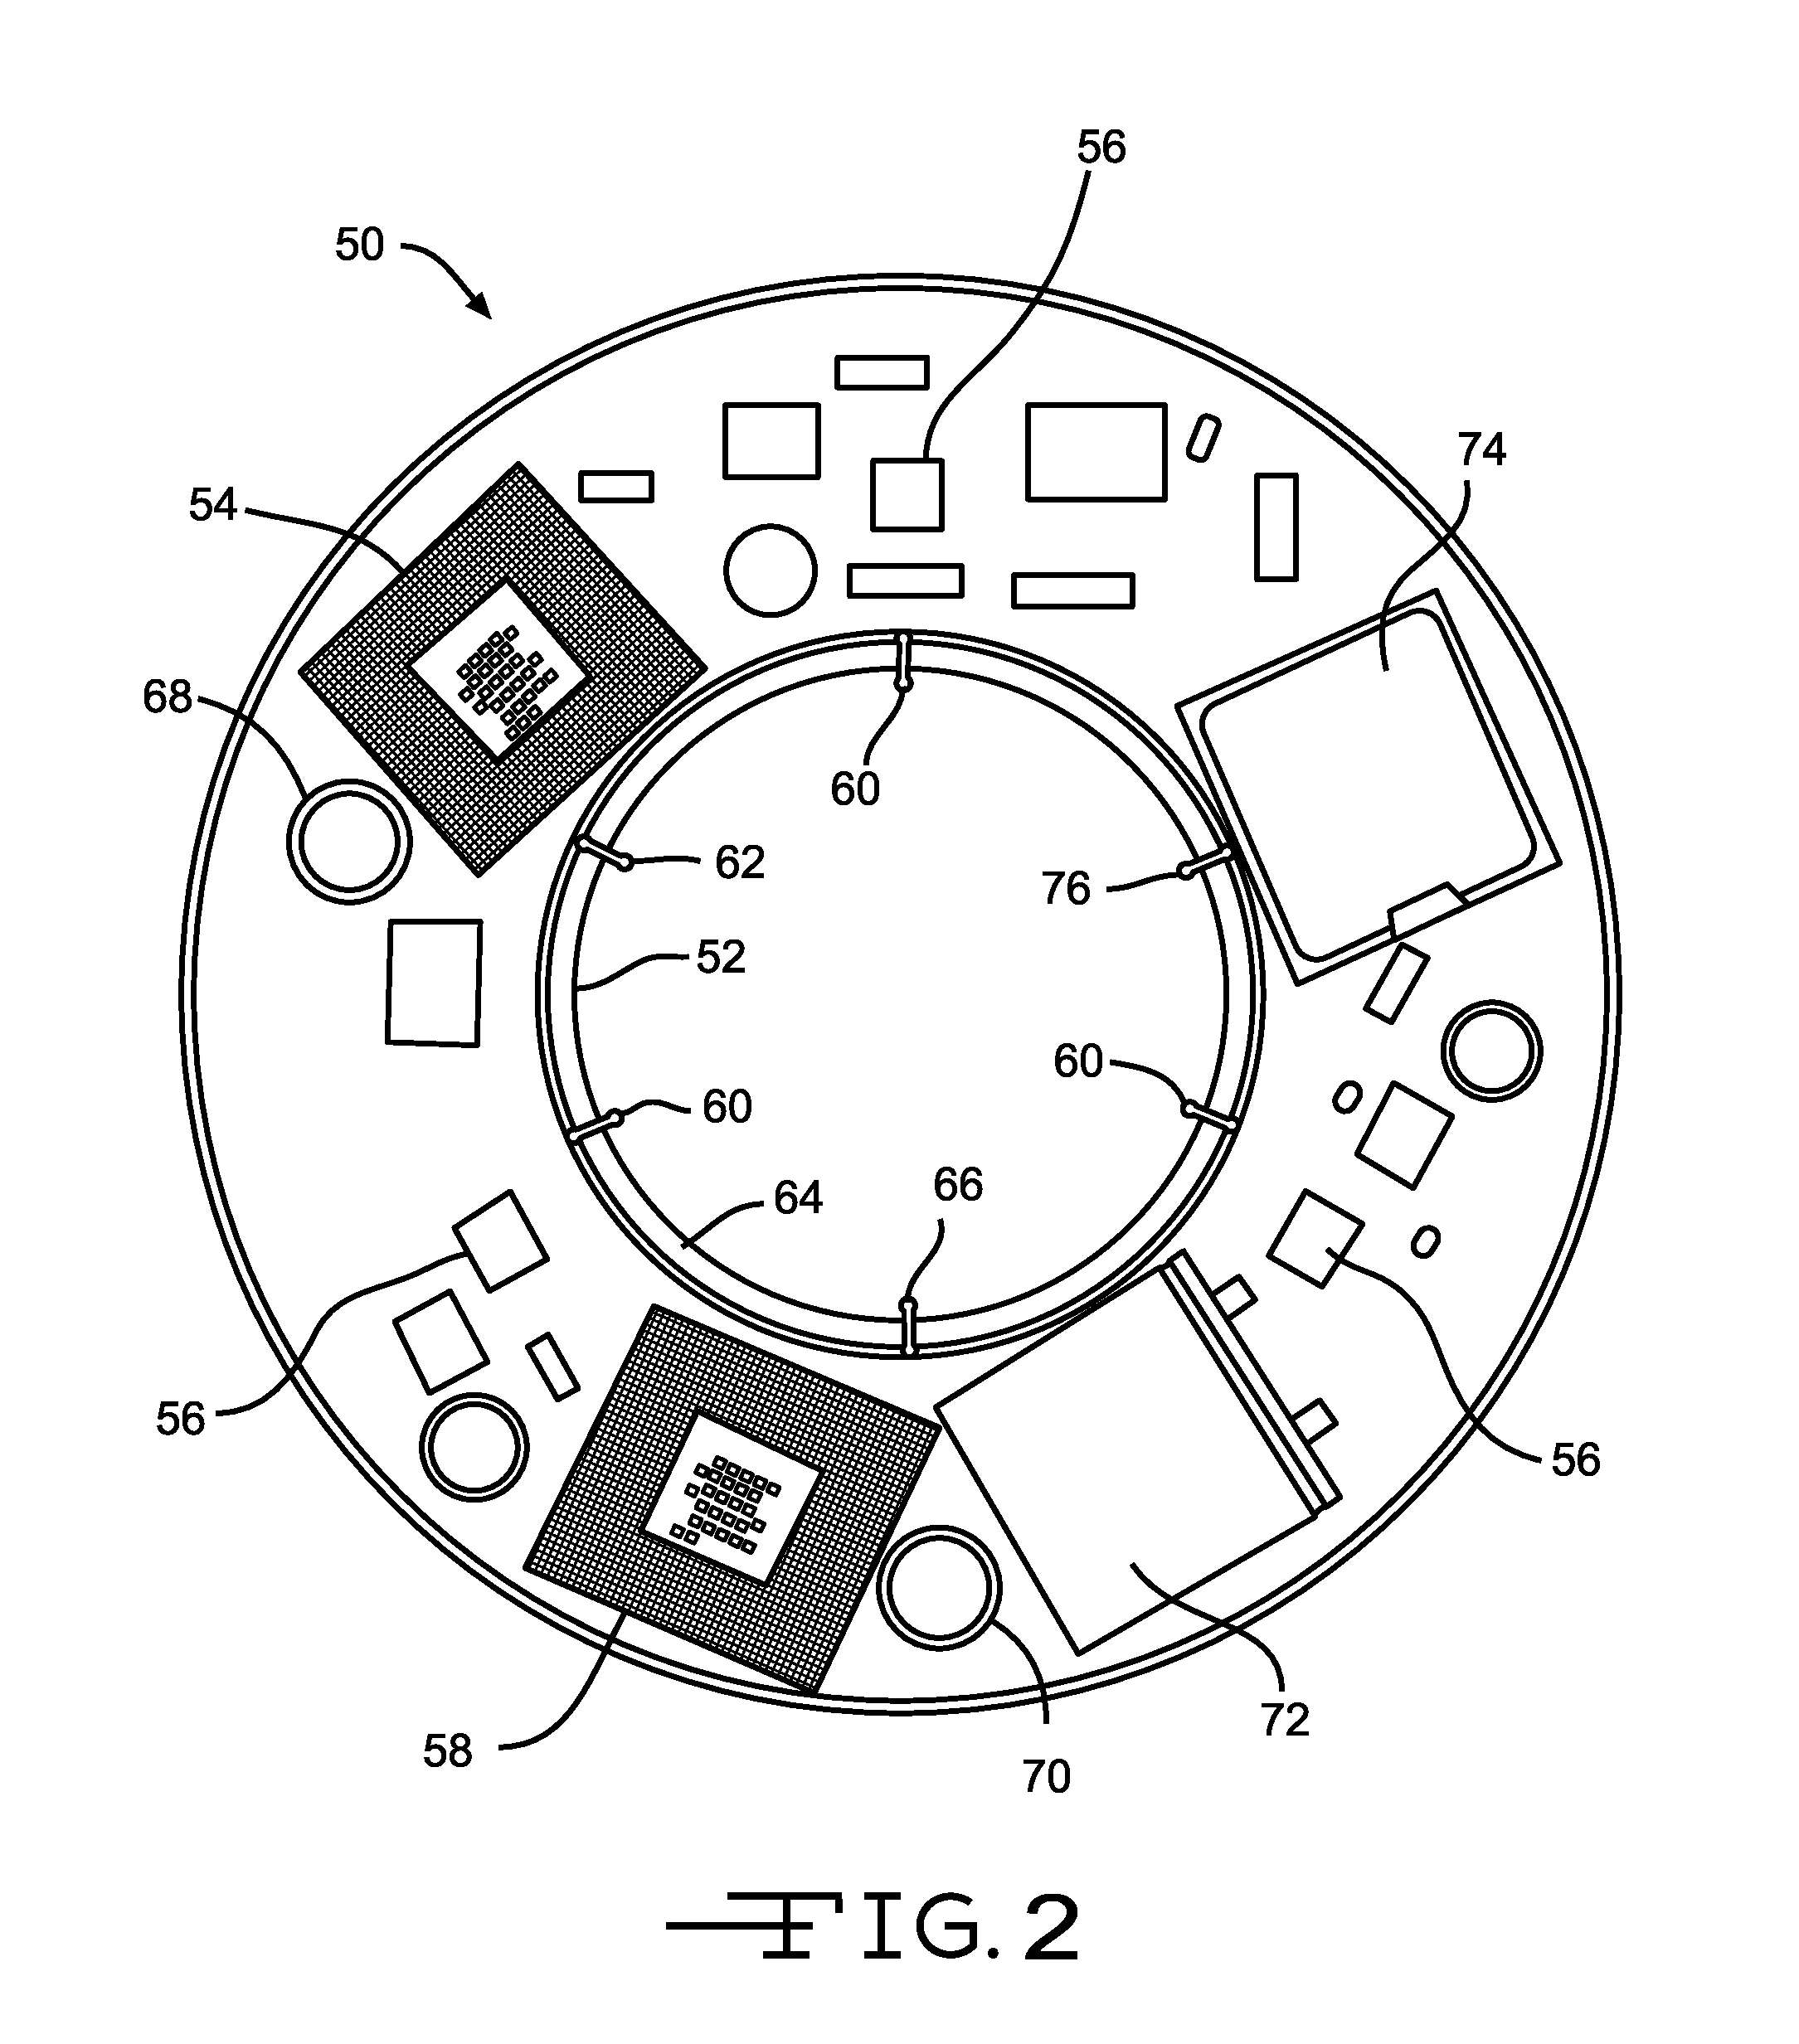 Powered apparatus for fluid applications